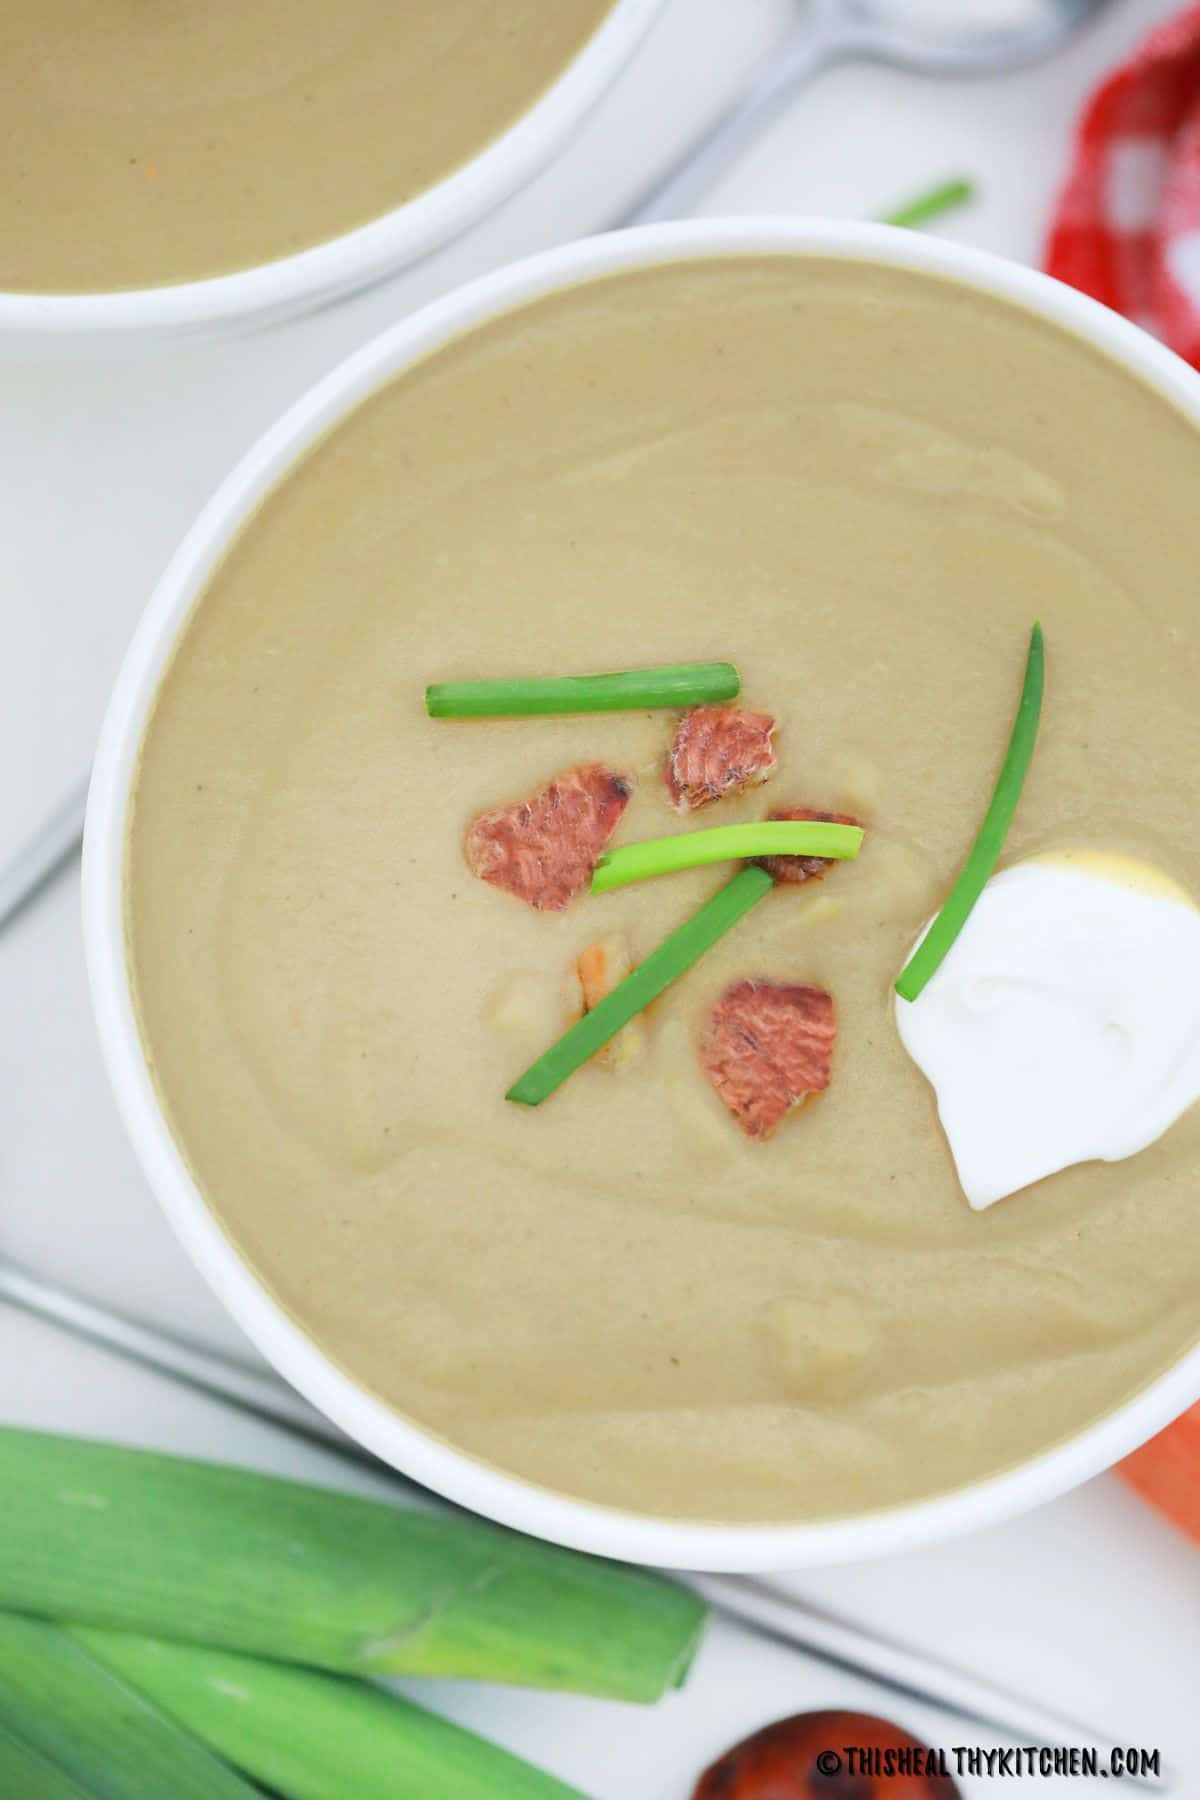 Bowl of creamy brown soup with green onion and chestnut pieces on top.